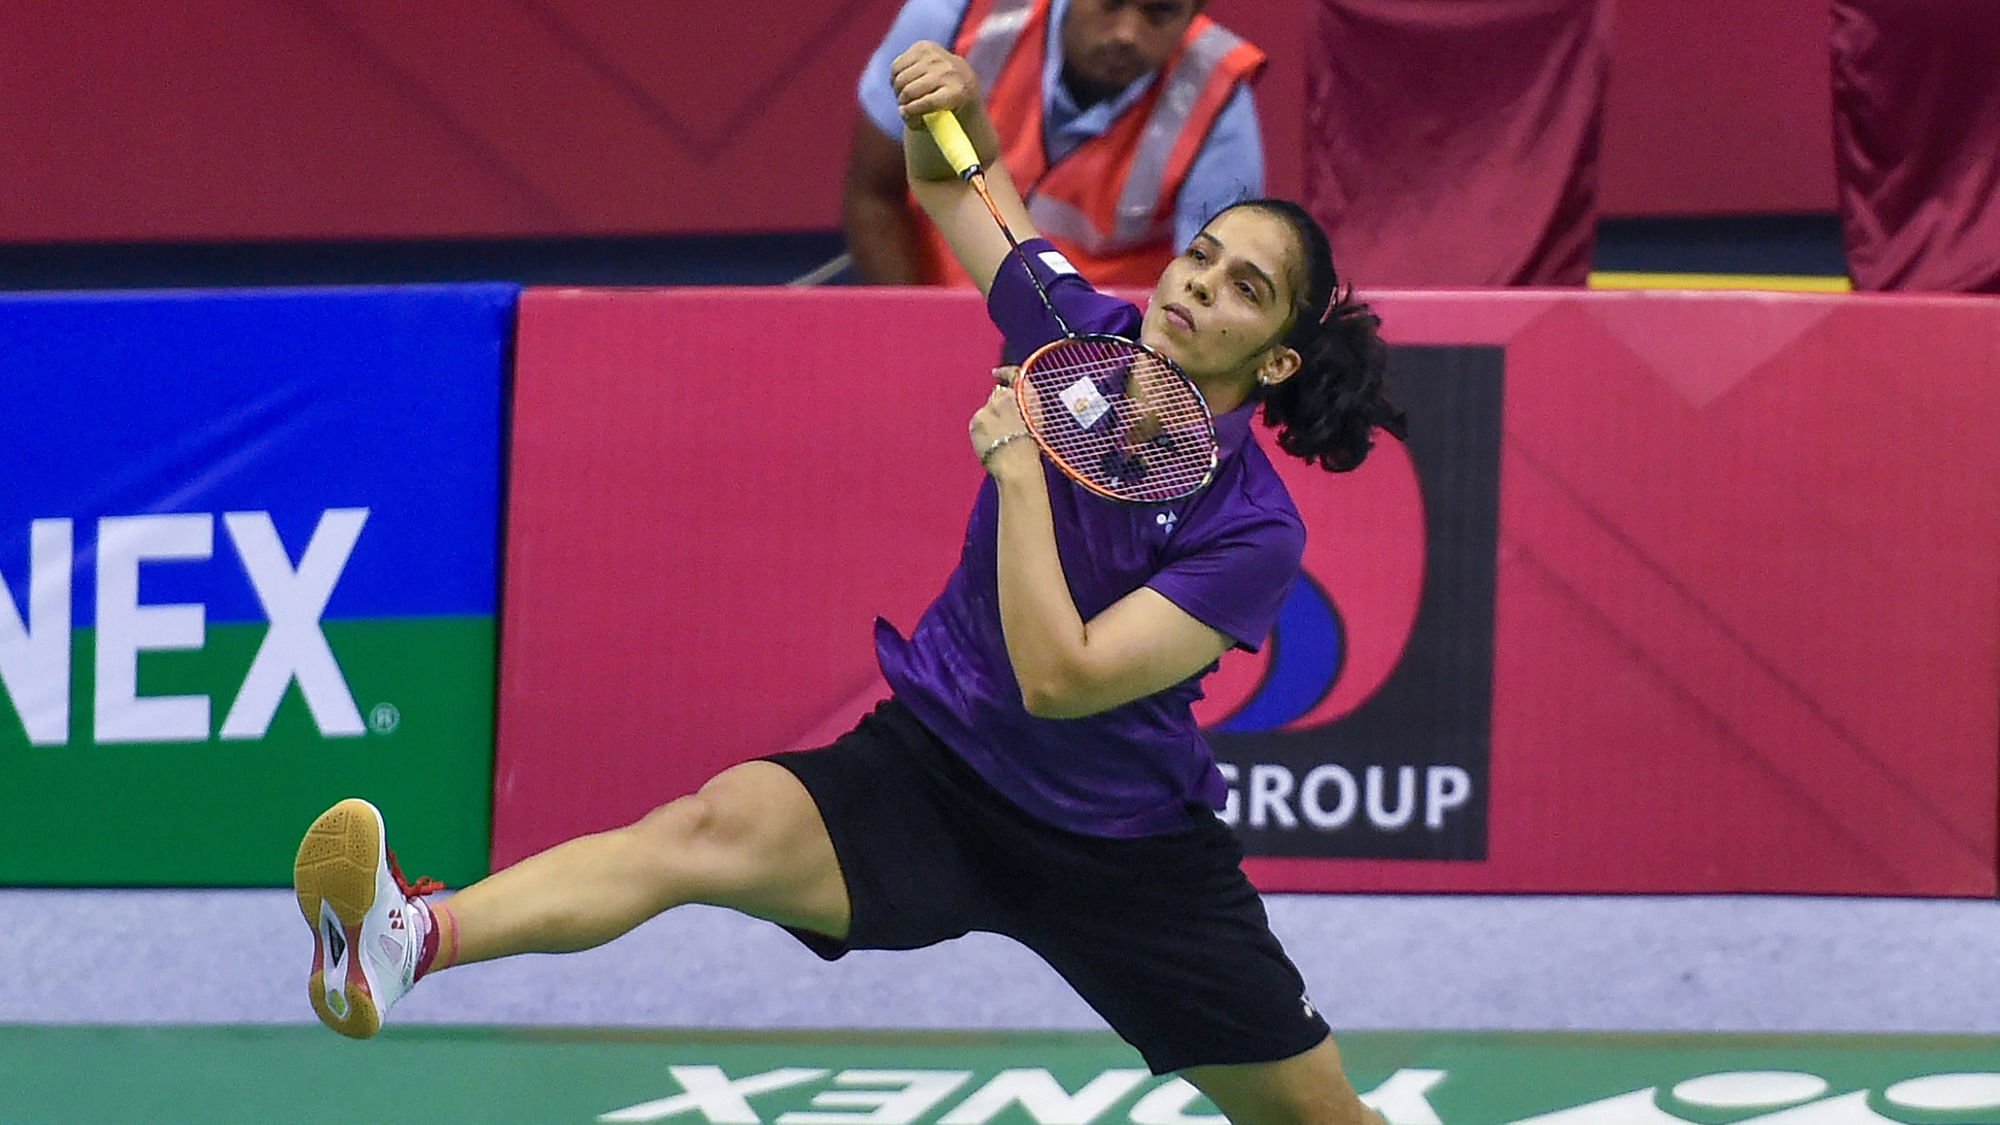 Saina Nehwal lost 18-21, 8-21 to Han Yue of China in the women’s singles final of the Syed Modi International Championships.